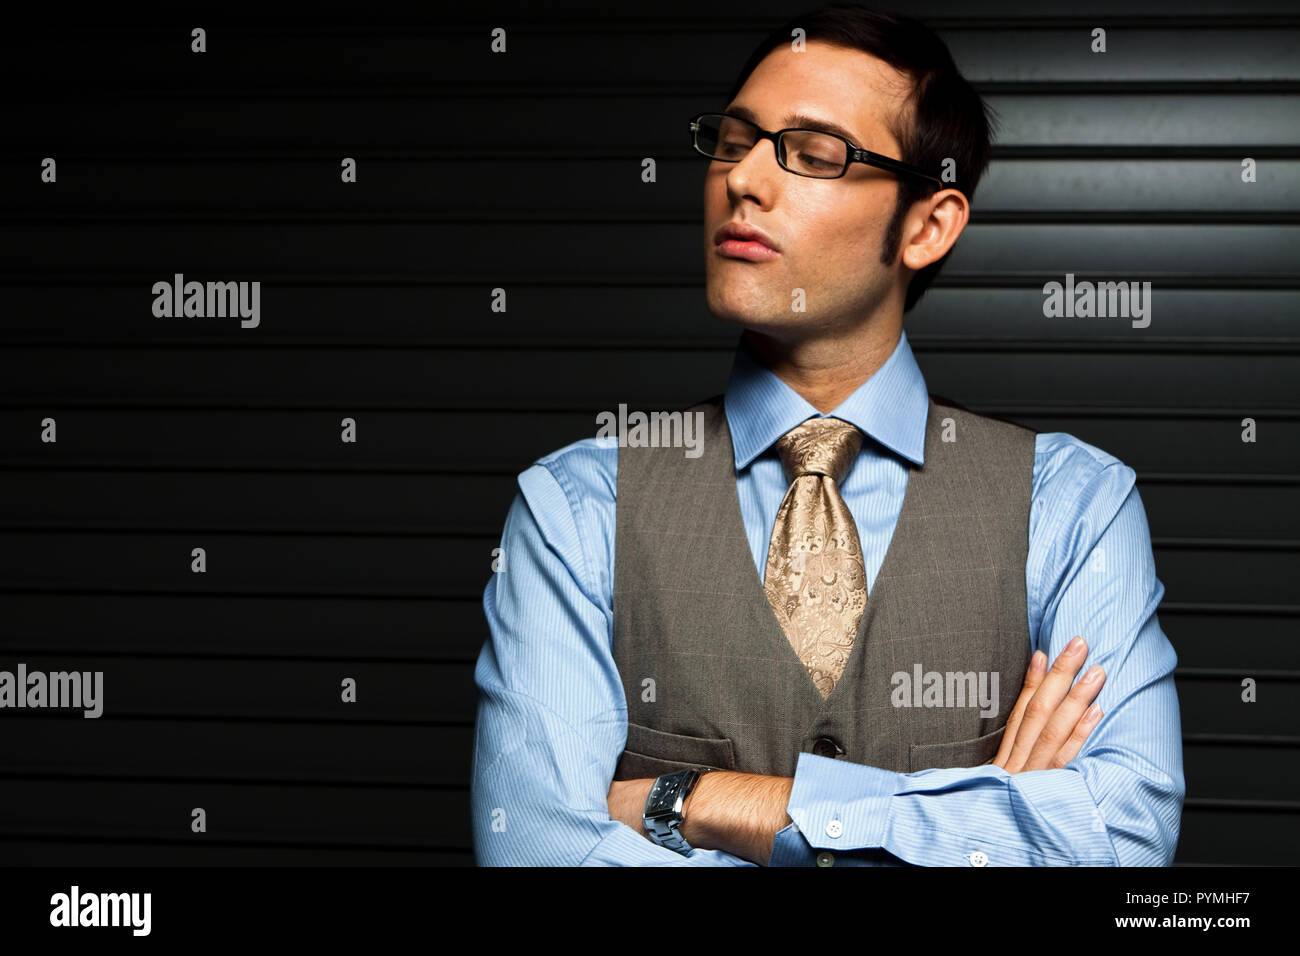 Fashionable Well Dressed Man Isolated On Black Stock Photo